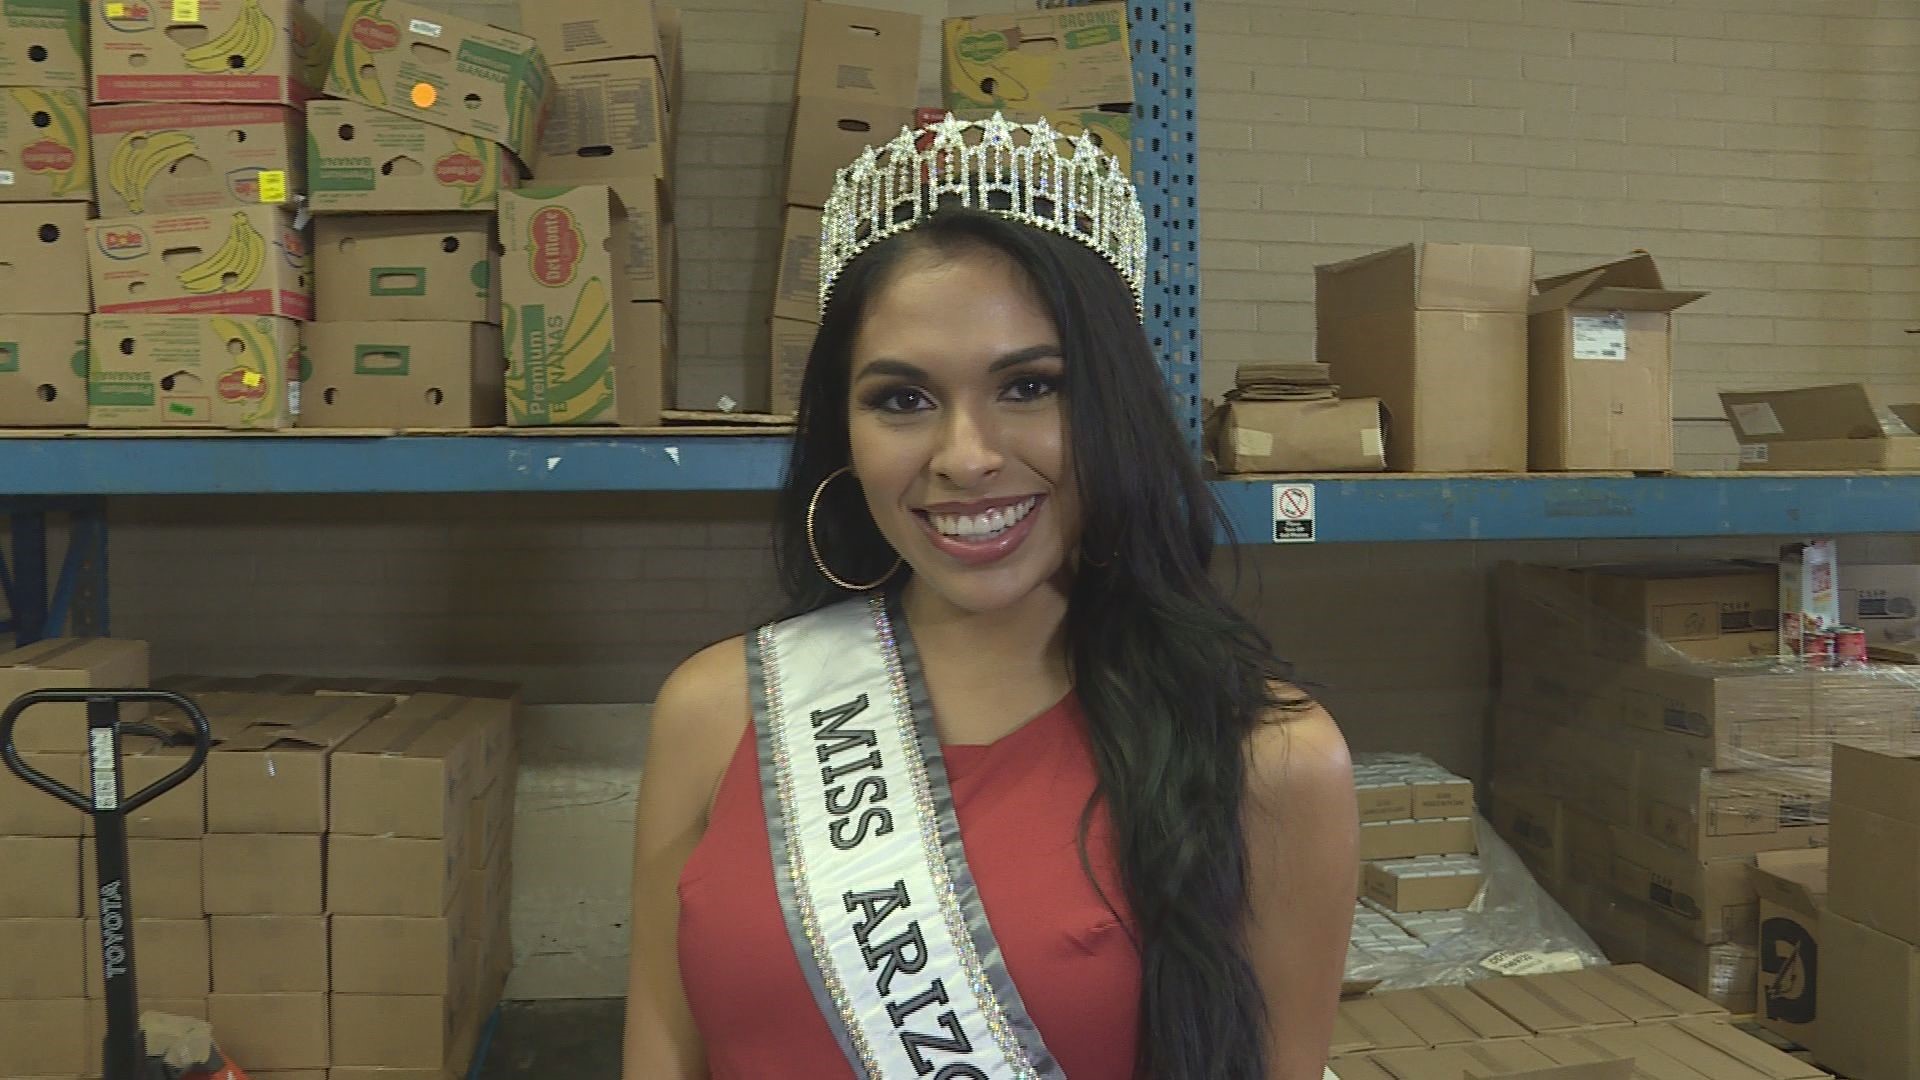 Yesenia Vidales is the current Miss Arizona USA for 2020. She's now raising awareness for the Hope for Hunger Food Bank in Glendale amid the COVID-19 pandemic.